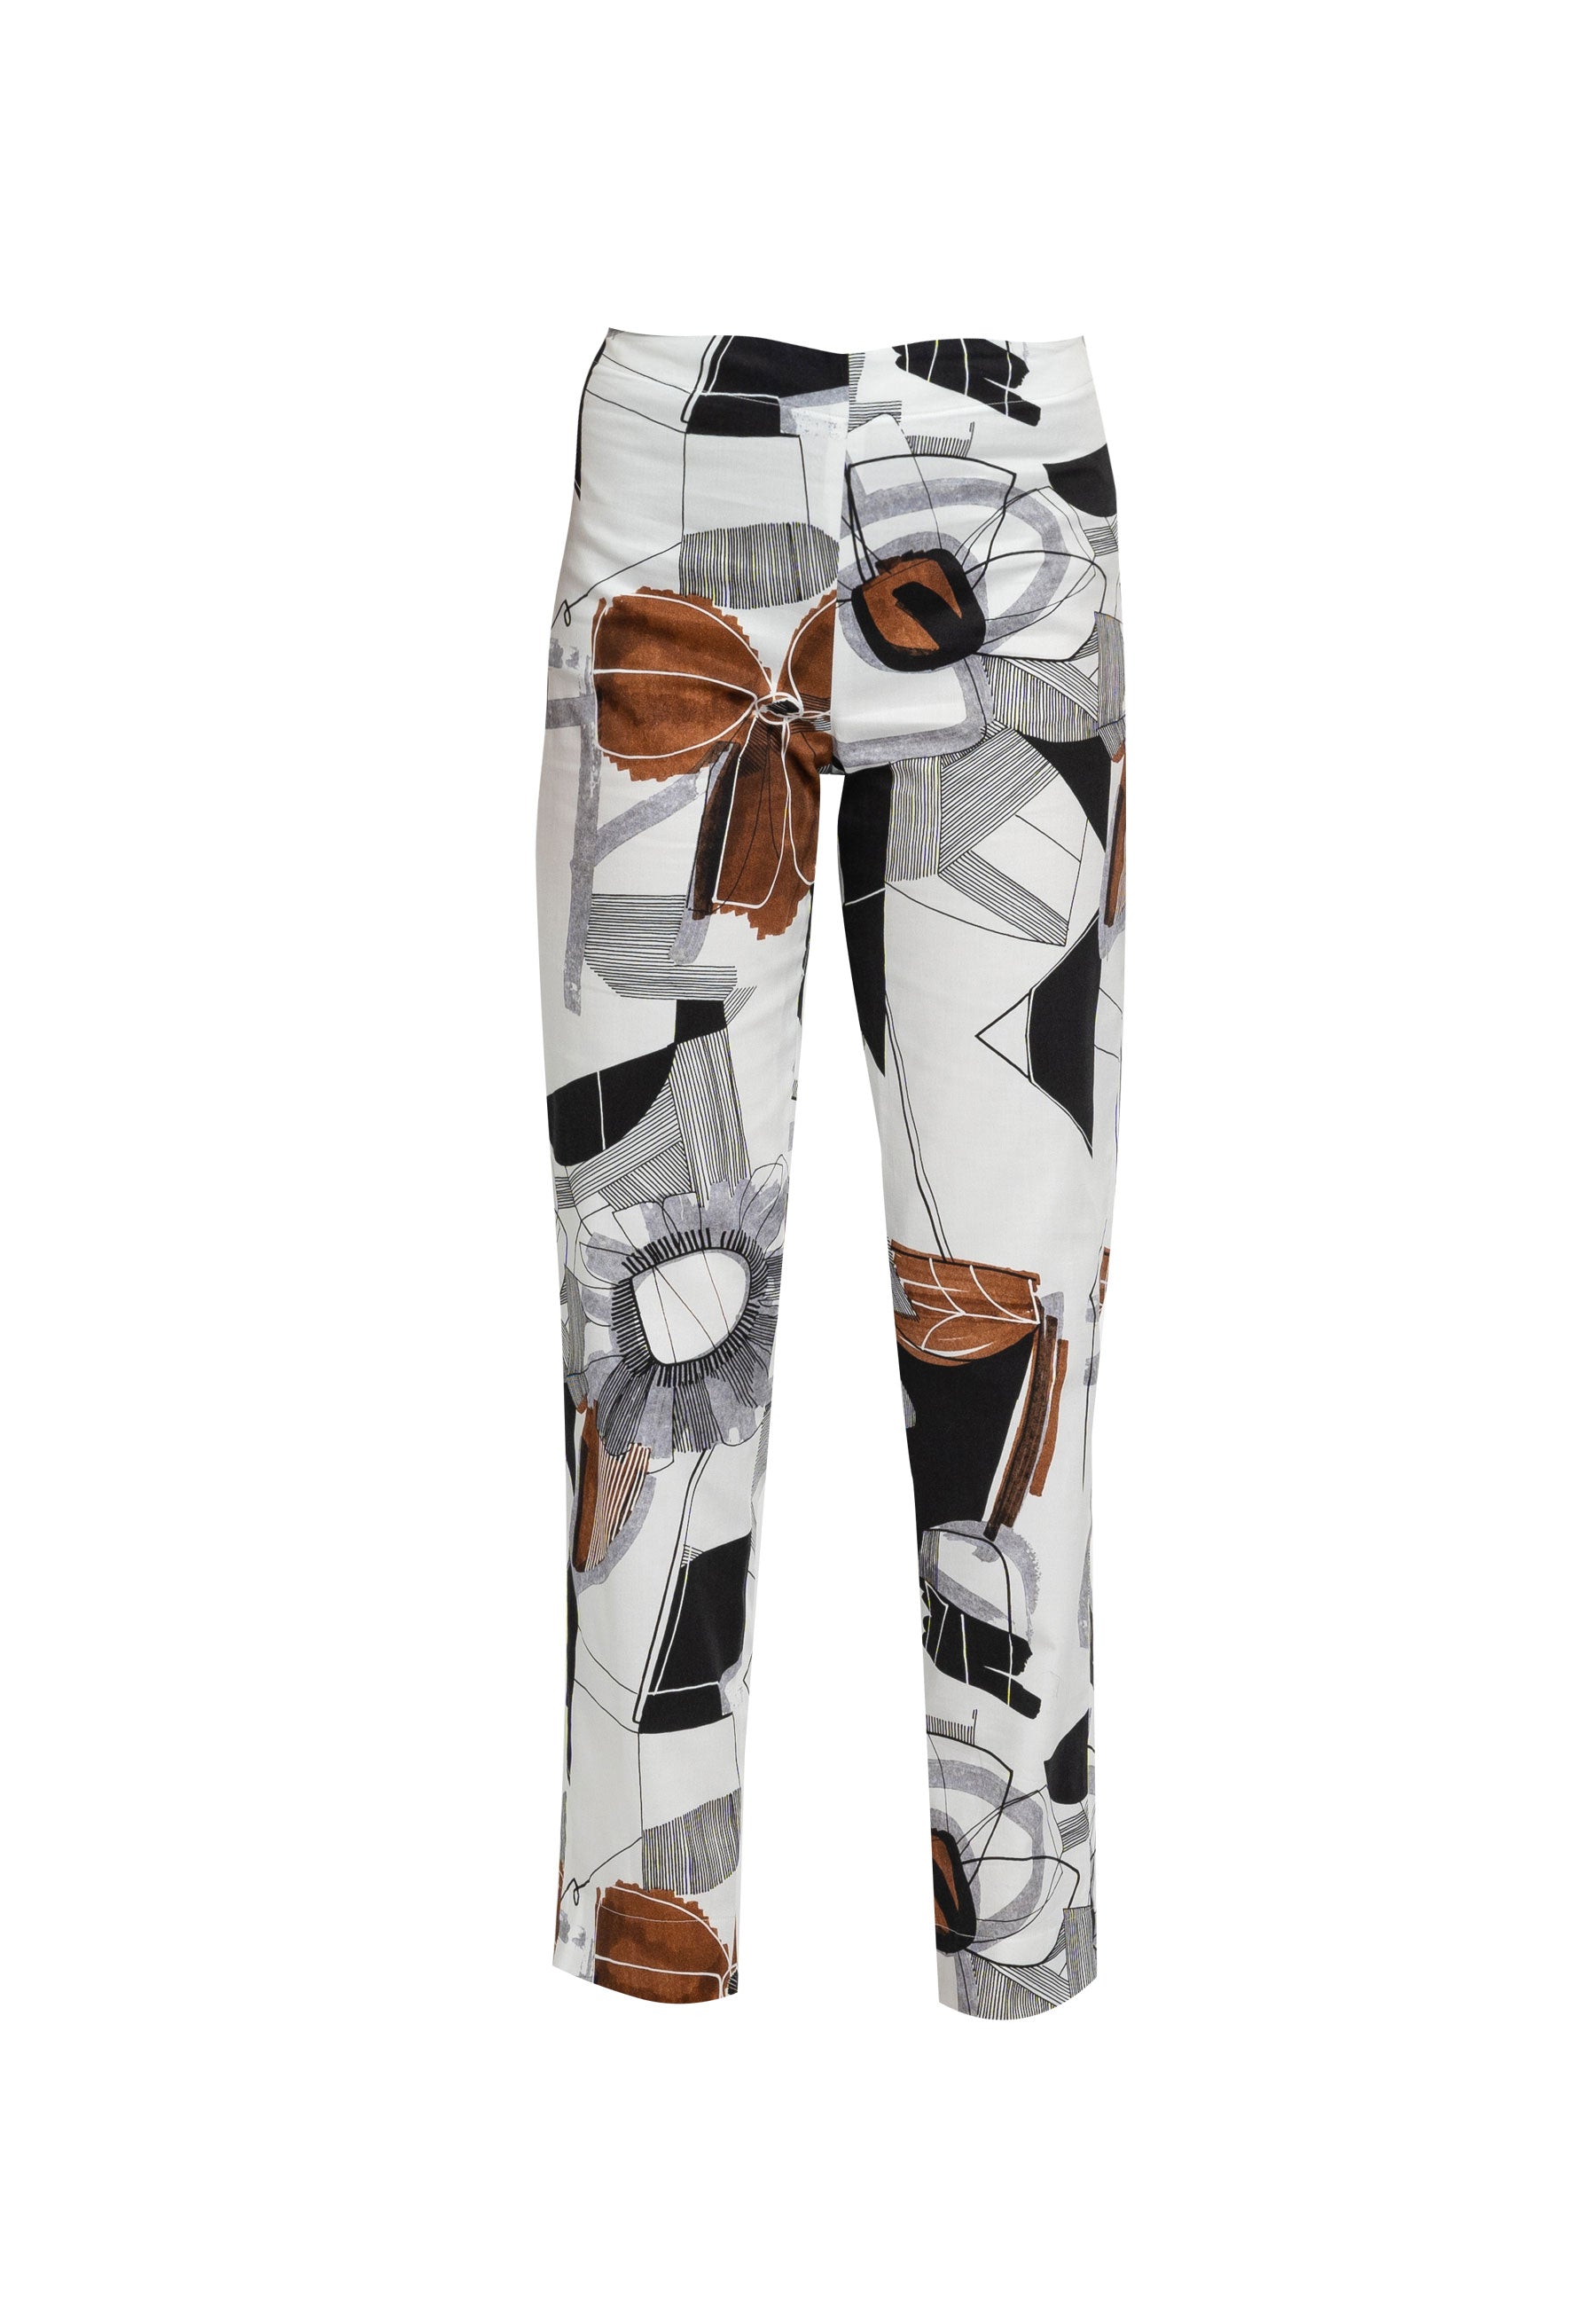 abstract women pants; trousers for women women's trousers, pants, female pants, designer pants, women's trousers onlinetrousers, women's trousers, trousers for women, green trousers, organic cotton trousers, sustainable fashion